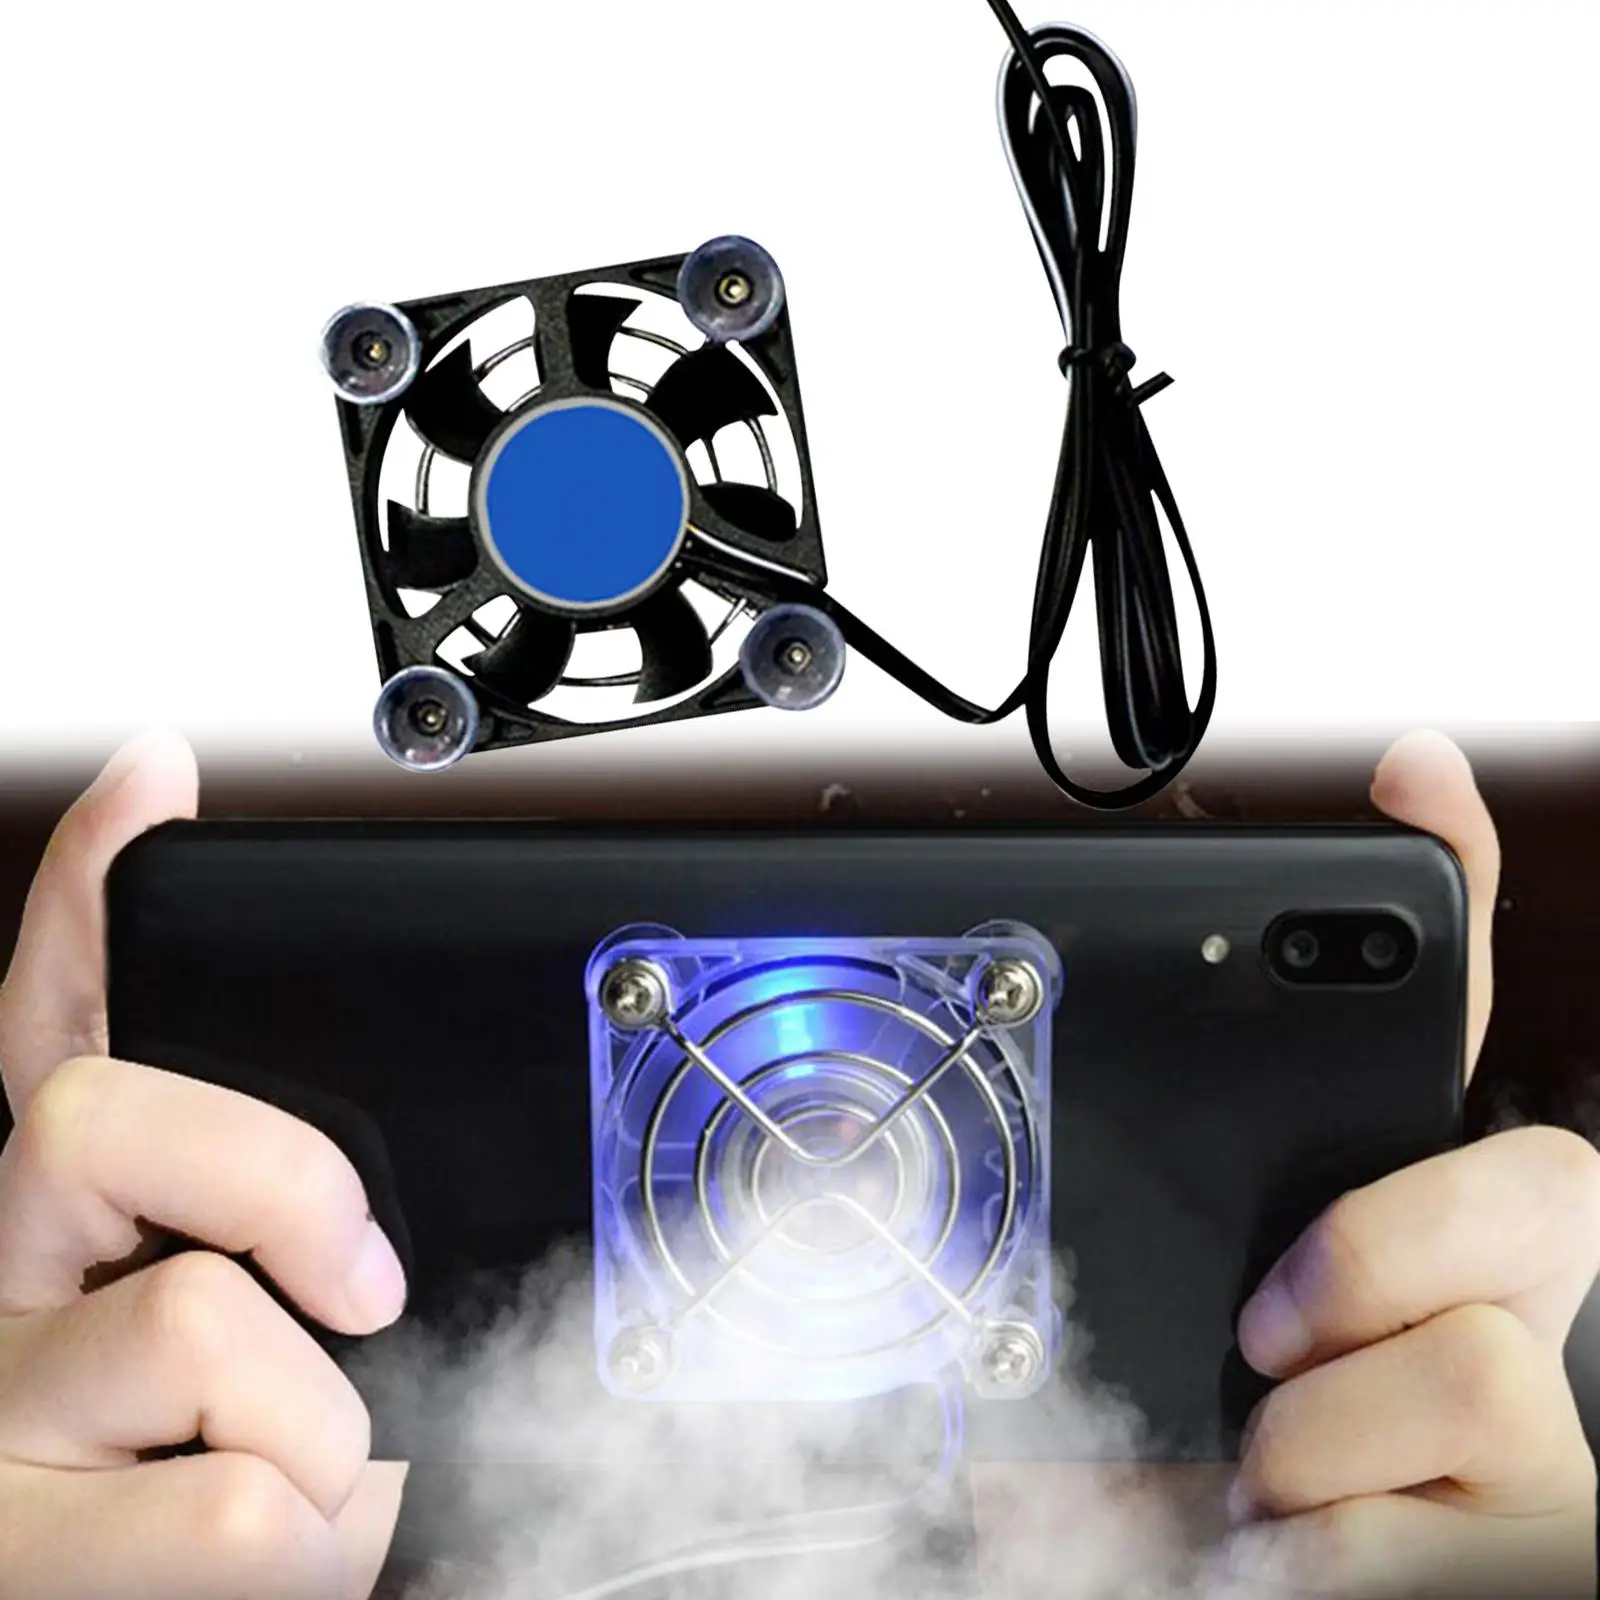 USB Charging Phone Cooling Fan Cooler Mute Mini Portable Cellphone Radiator Outdoor Mobile Gaming